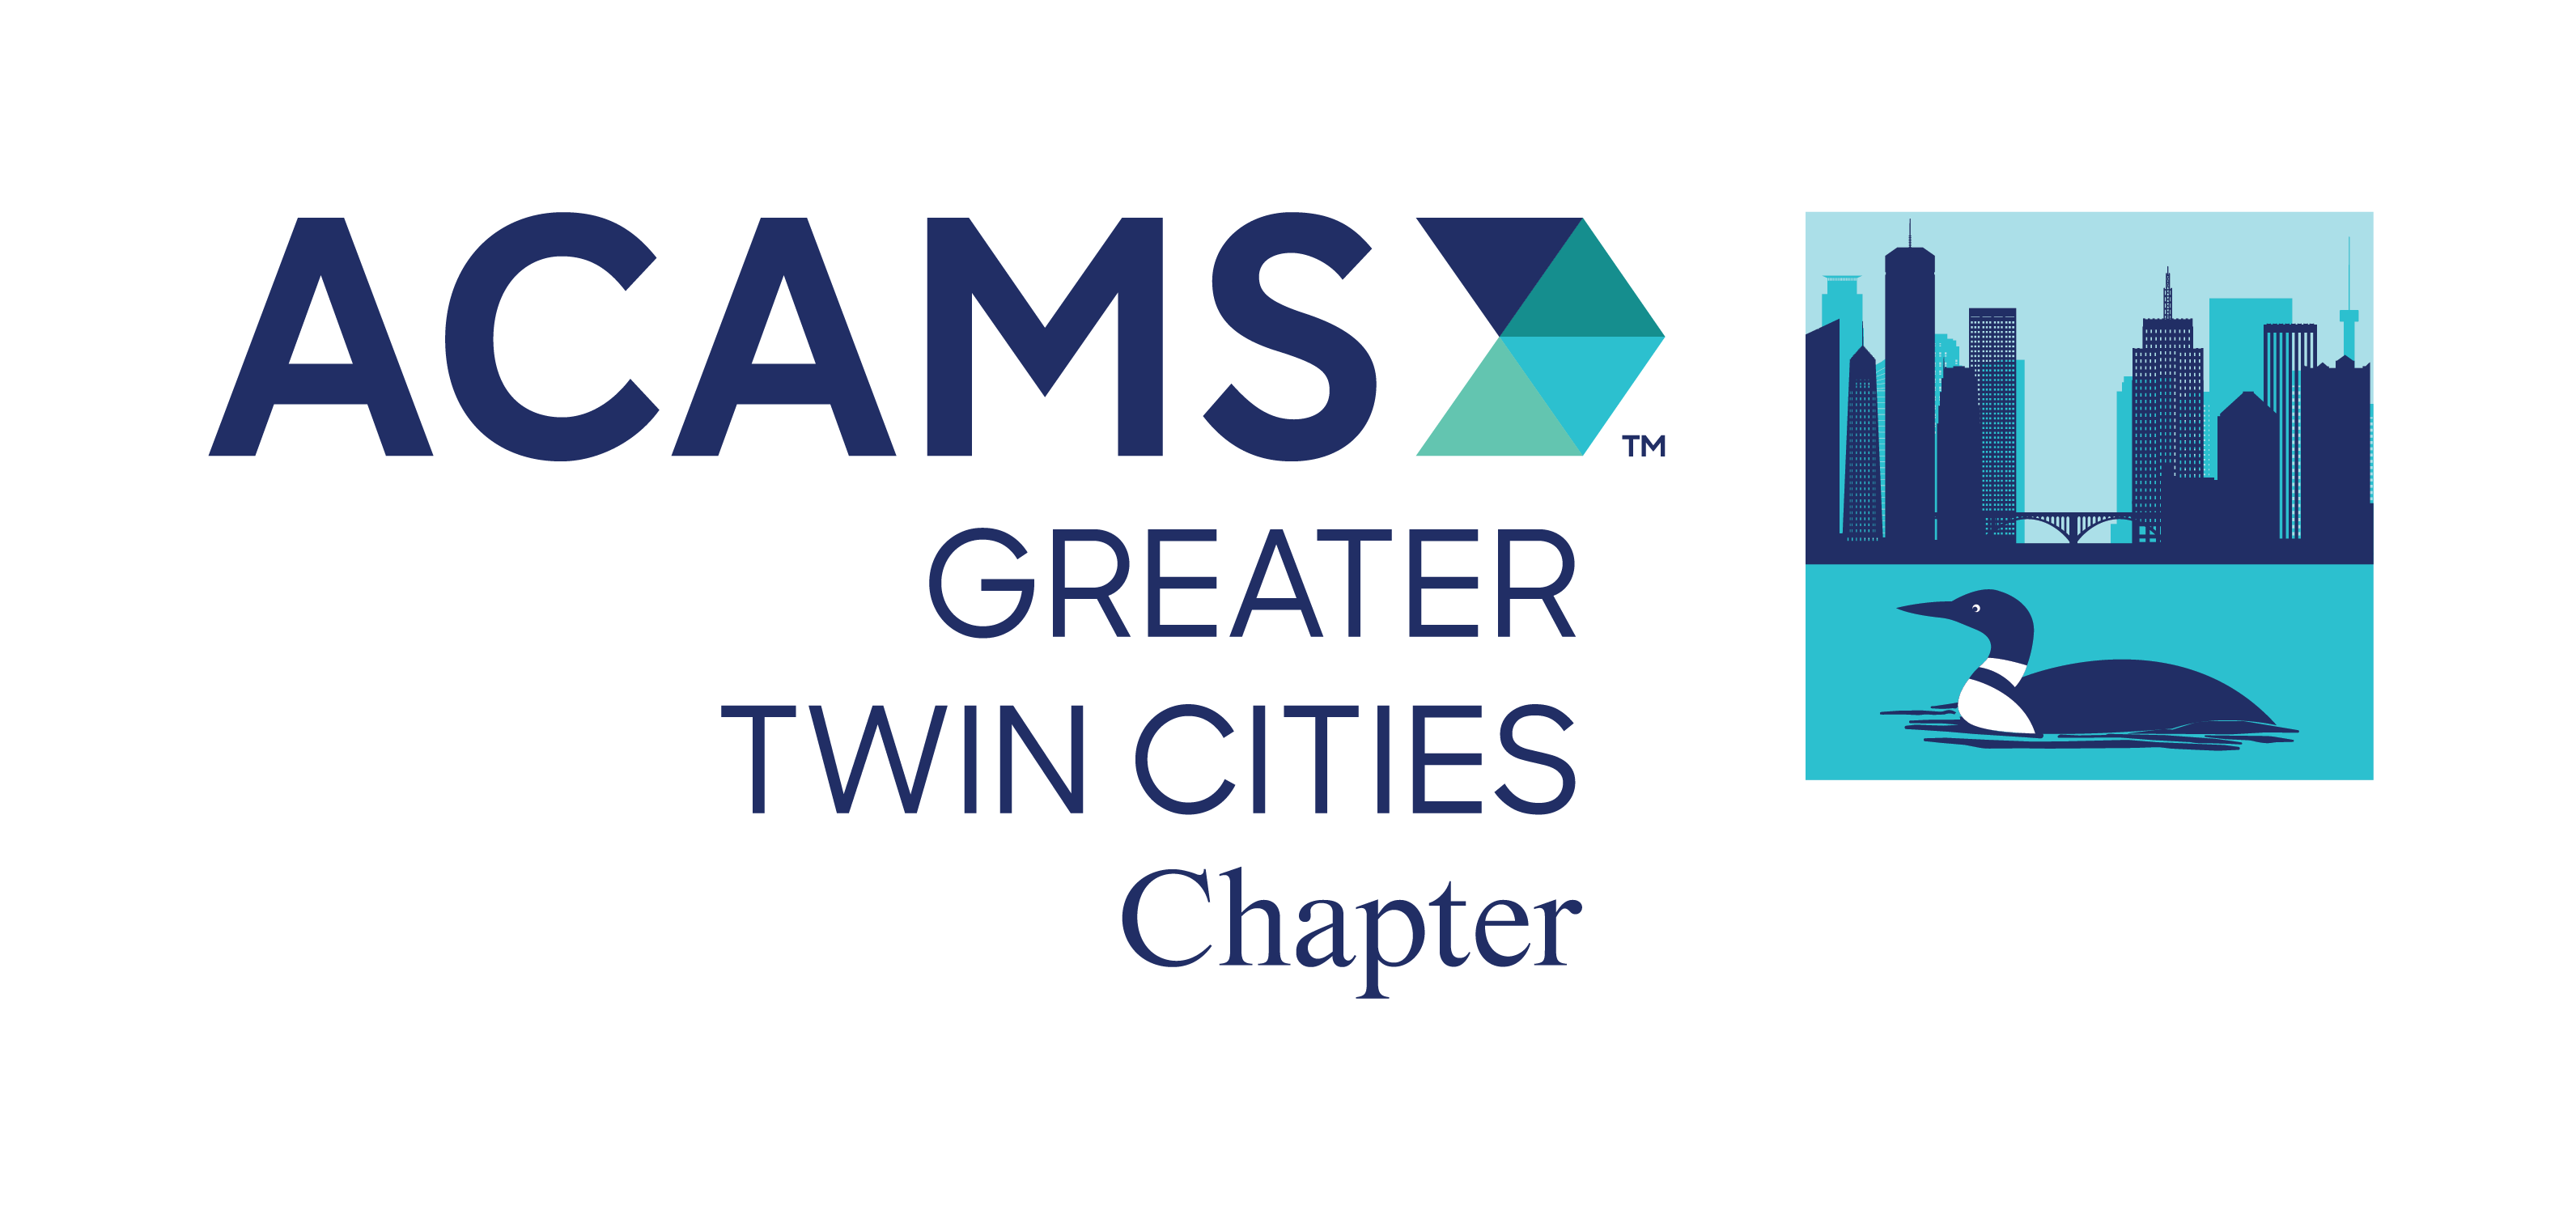 ACAMS Greater Twin Cities Chapter